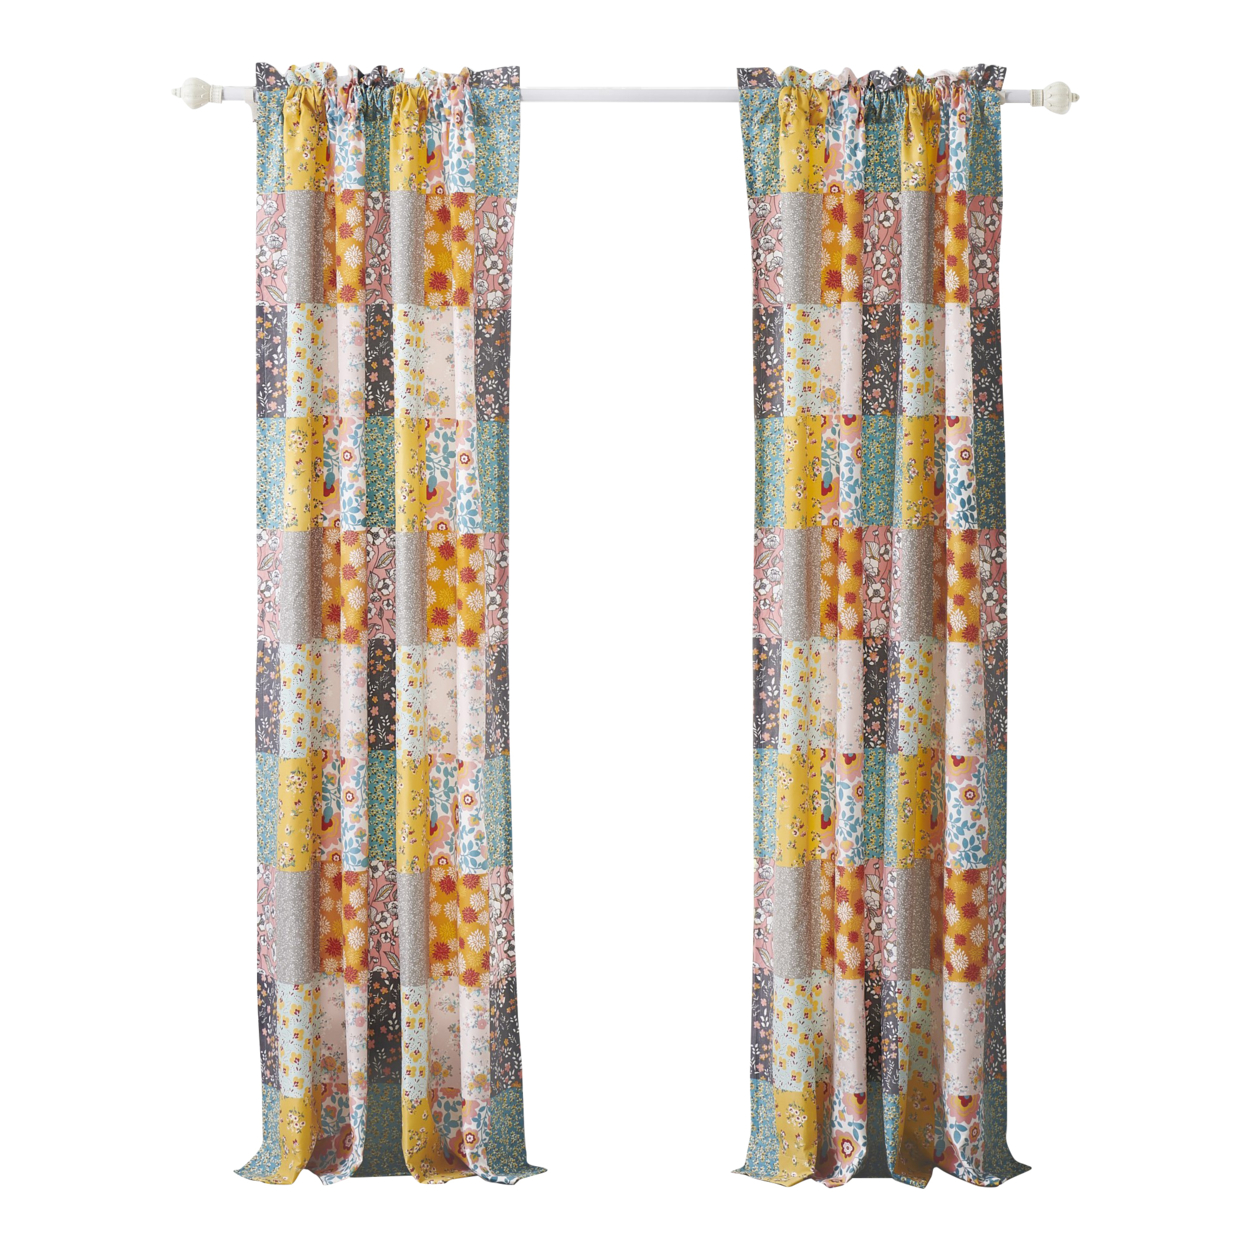 Turin 84 Inch Window Curtains, Brushed Microfiber, Multicolor Patchwork